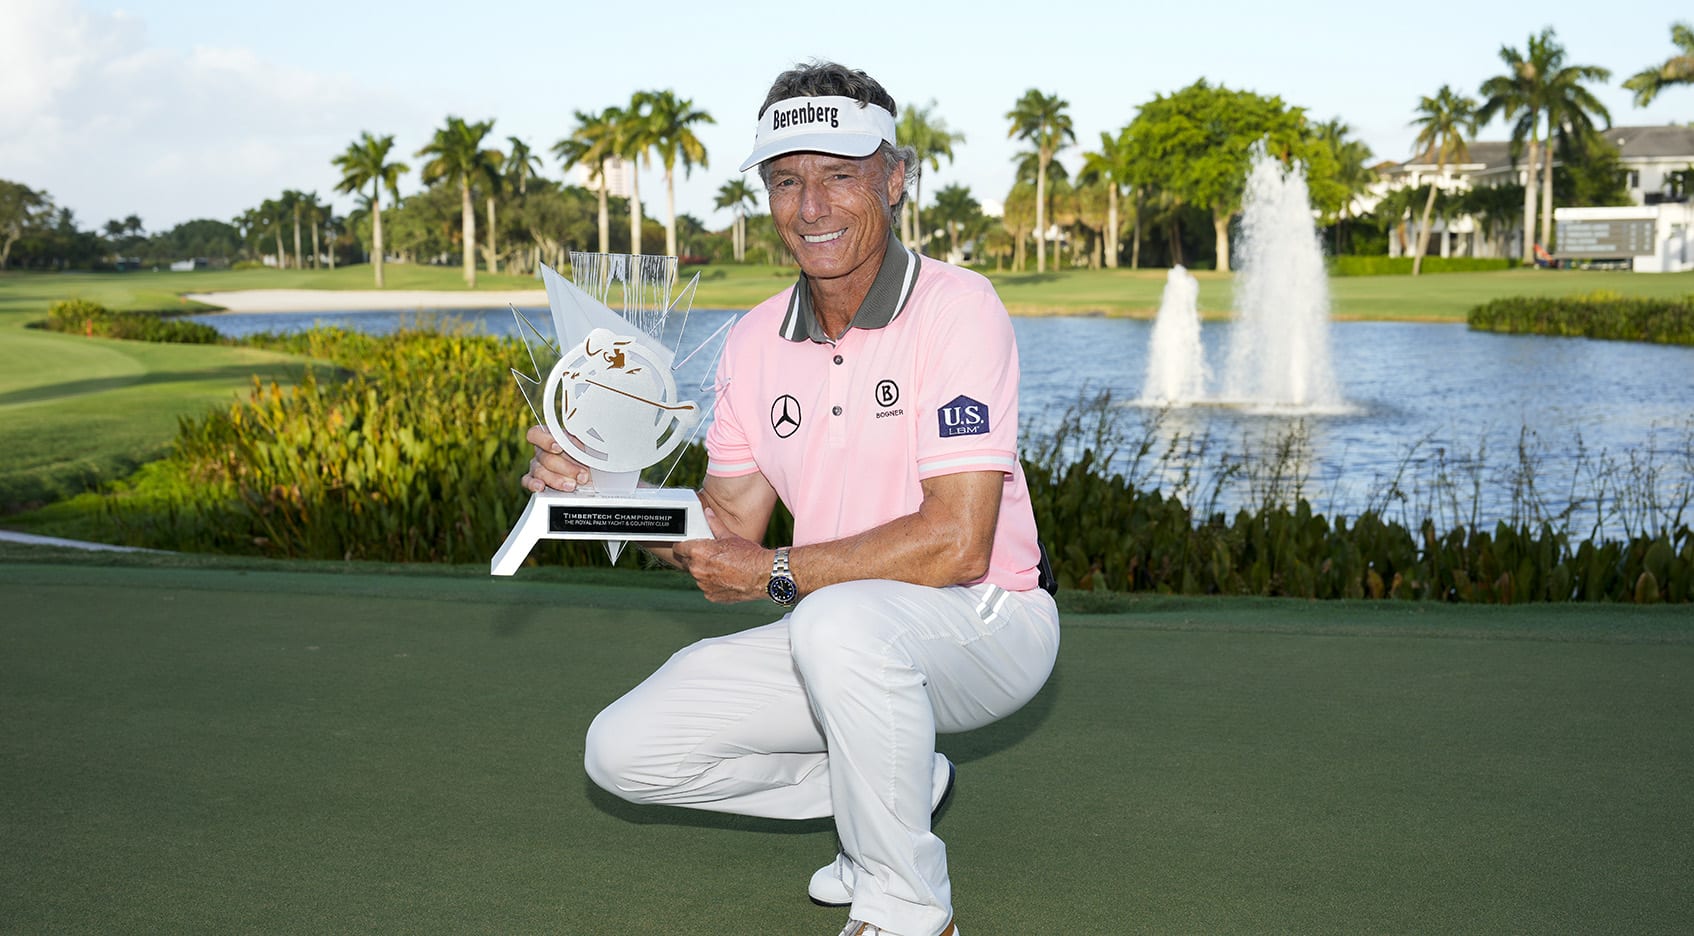 BOCA RATON, FLORIDA - NOVEMBER 06: Bernhard Langer of Germany celebrates with the trophy on the 18th green during the final round of the TimberTech Championship at Royal Palm Yacht & Country Club on November 06, 2022 in Boca Raton, Florida. (Photo by Raj Mehta/Getty Images)